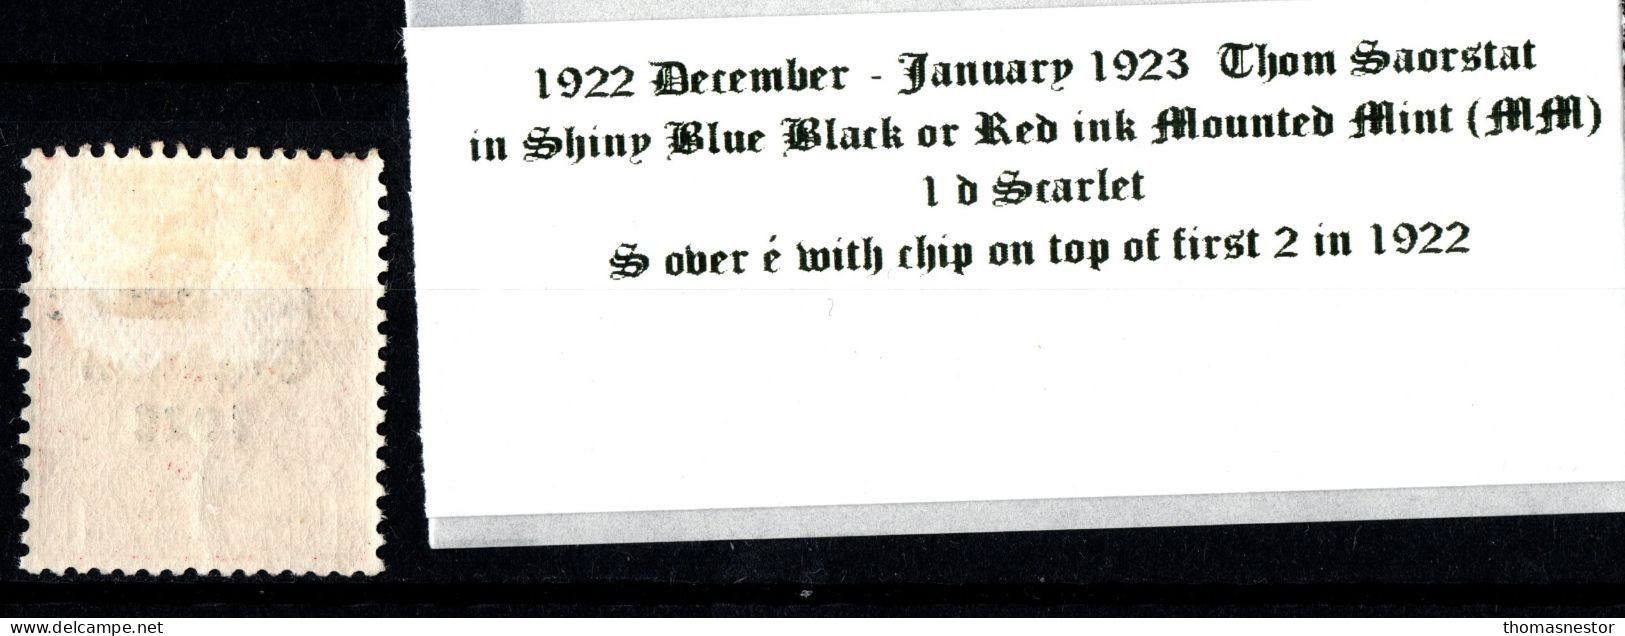 1922 - 1923 Dec-Jan Thom Saorstát In Shiny Blue Black Or Red Ink With S Over é, 1 D Scarlet, Mounted Mint (MM) - Neufs